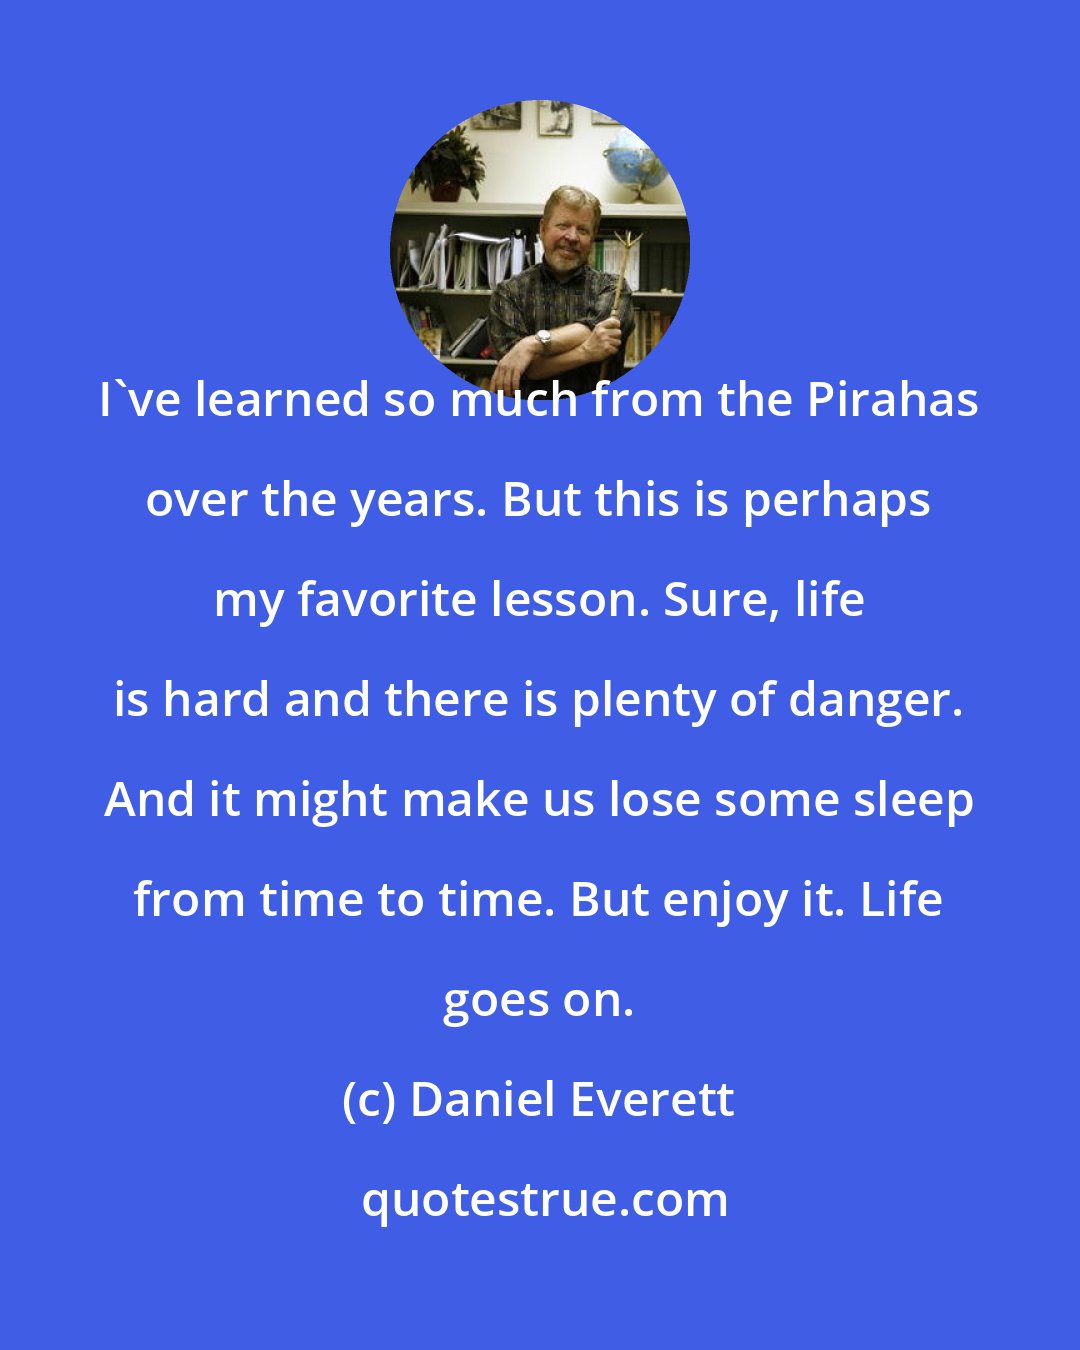 Daniel Everett: I've learned so much from the Pirahas over the years. But this is perhaps my favorite lesson. Sure, life is hard and there is plenty of danger. And it might make us lose some sleep from time to time. But enjoy it. Life goes on.